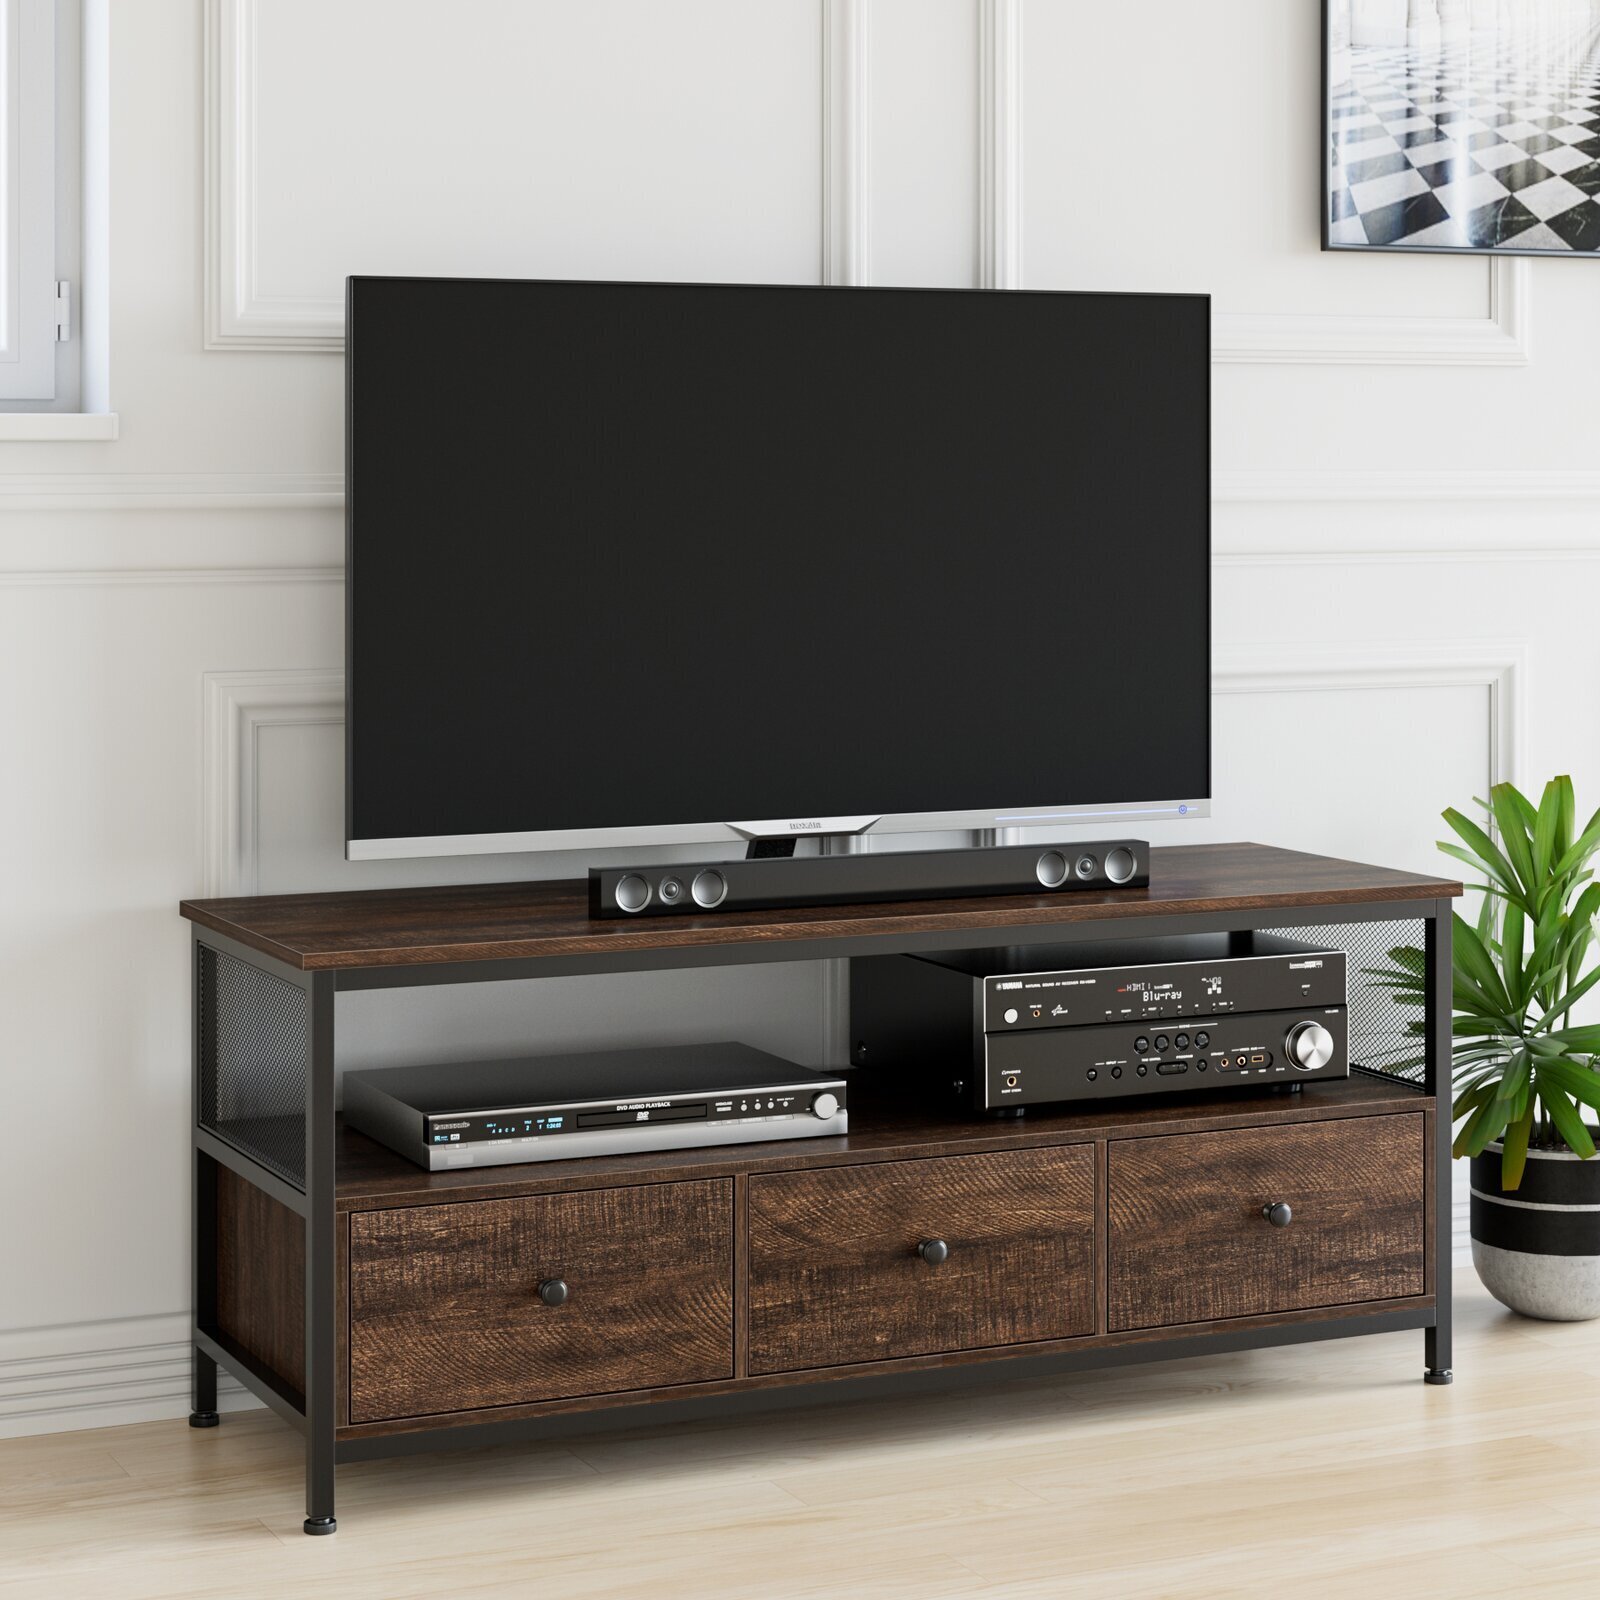 Wood TV Stand With Three Draws And Modern Central Cut Out